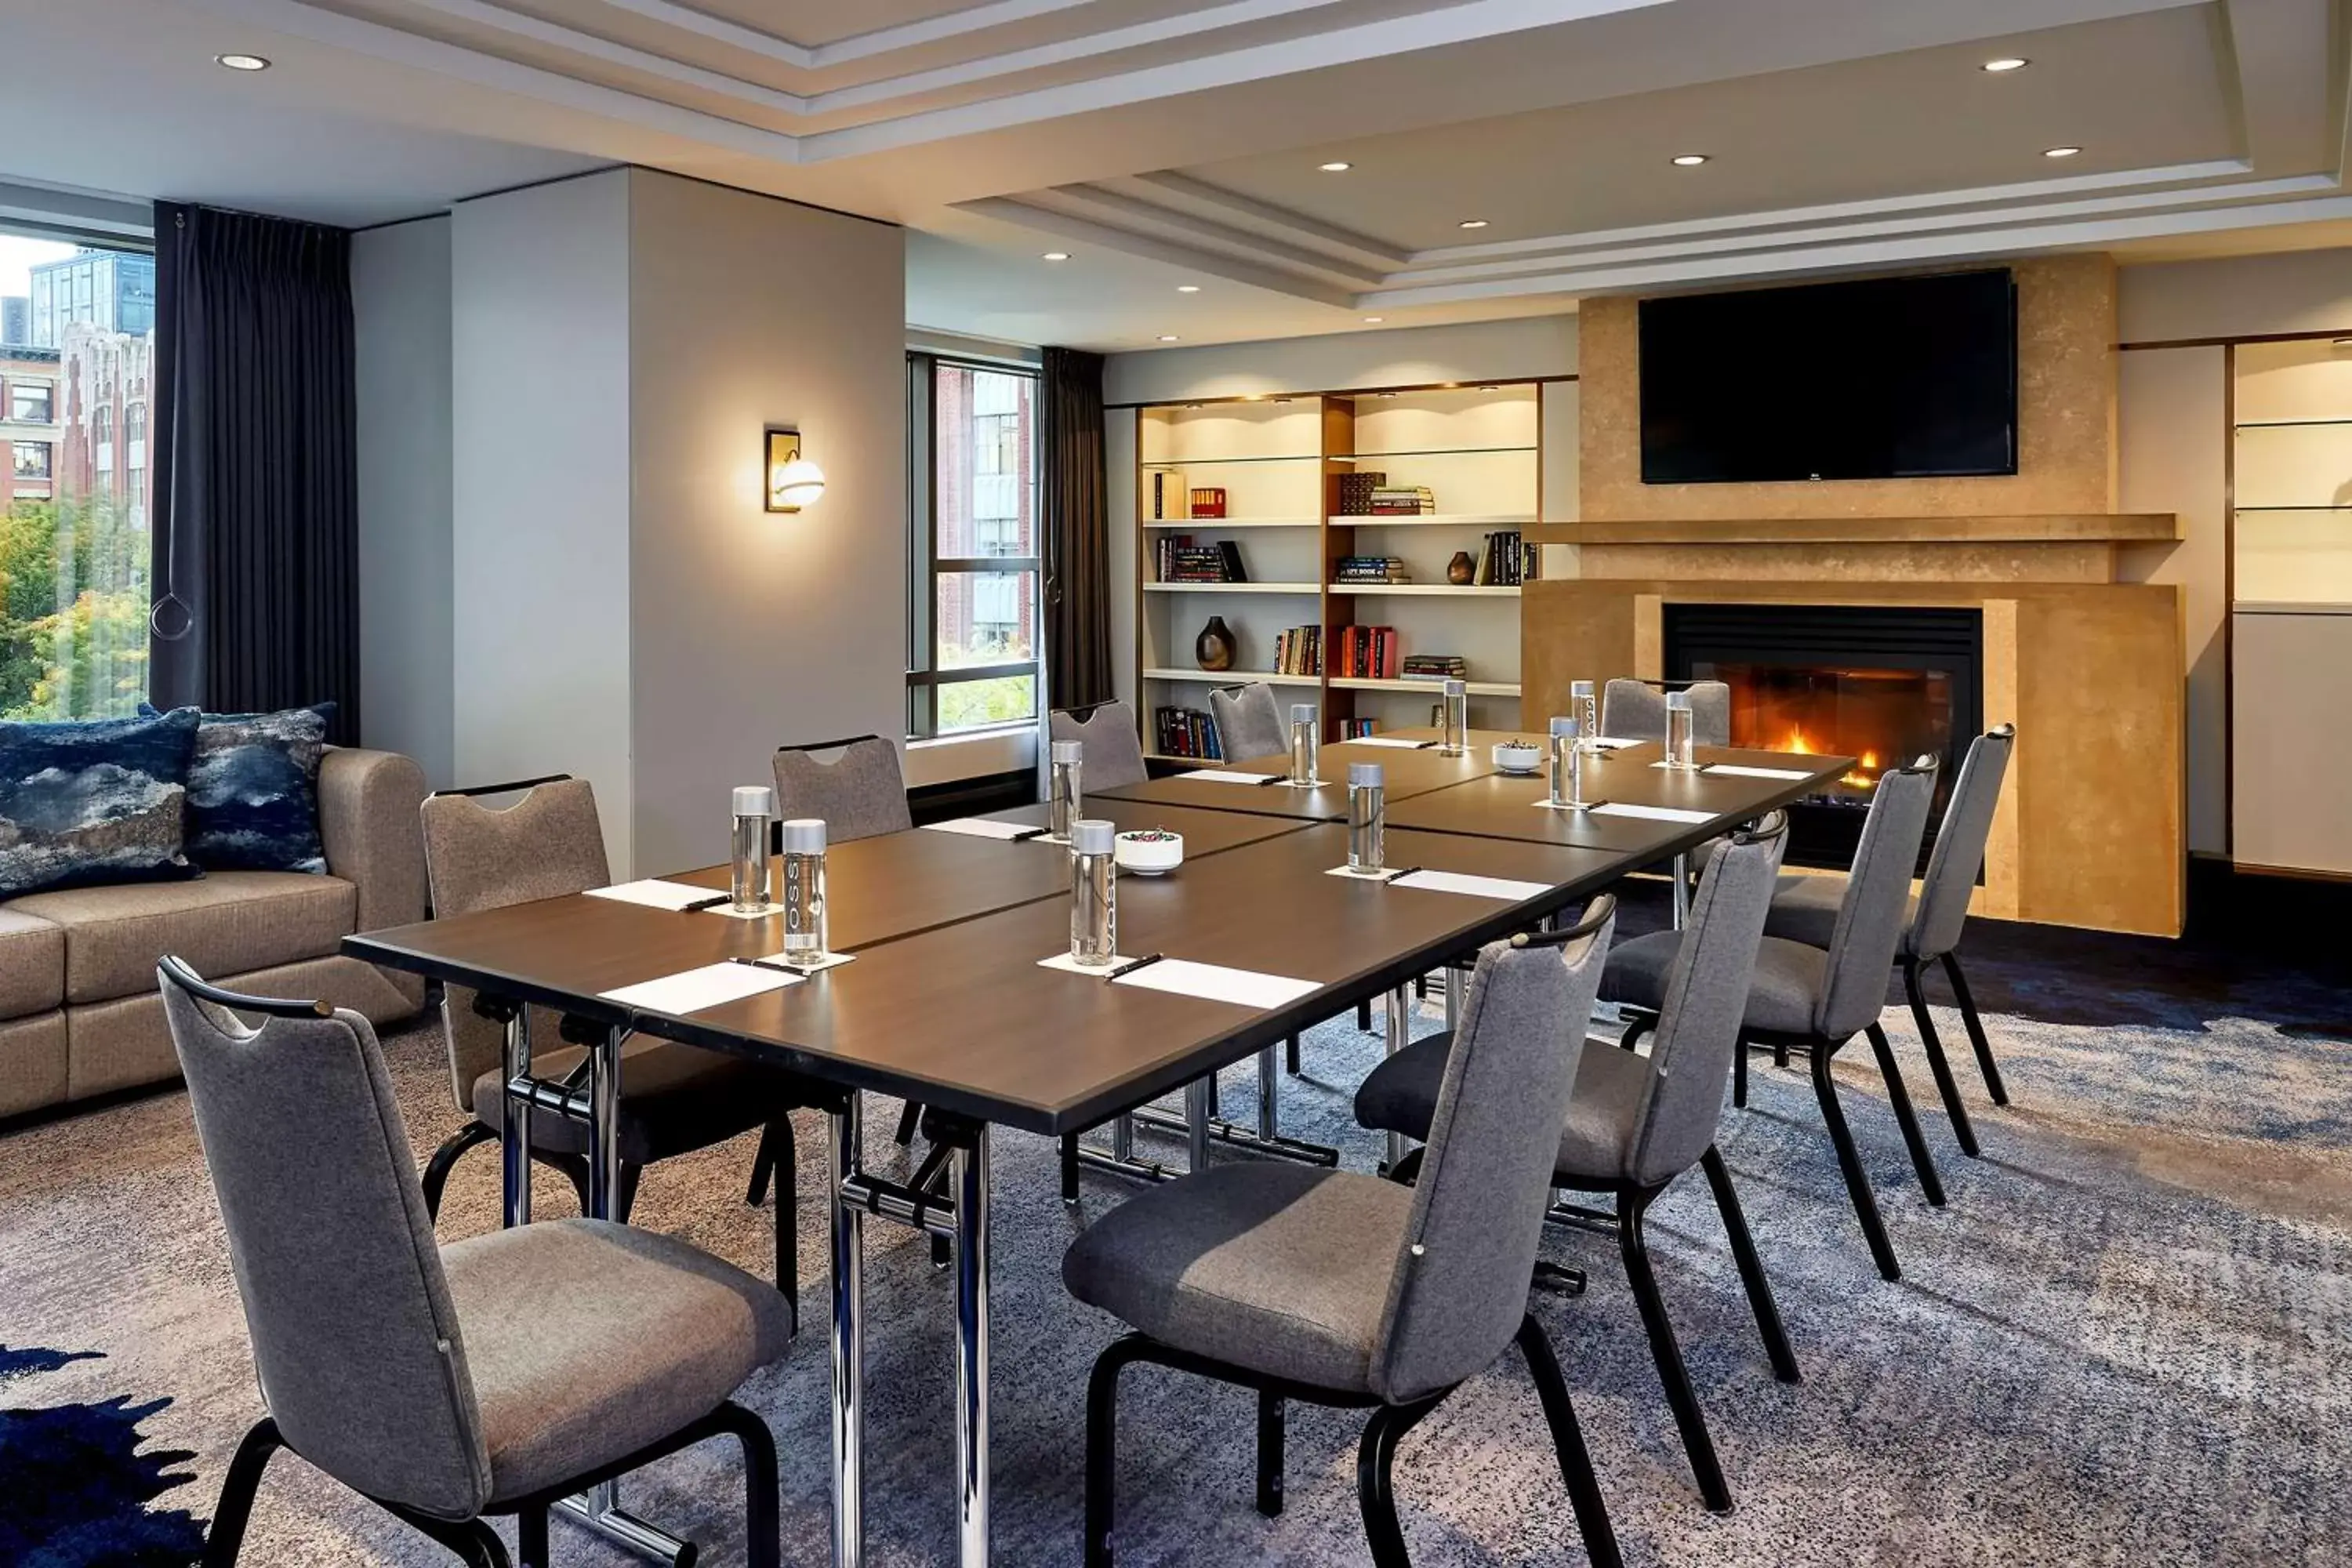 Meeting/conference room in Hotel 1000, LXR Hotels & Resorts